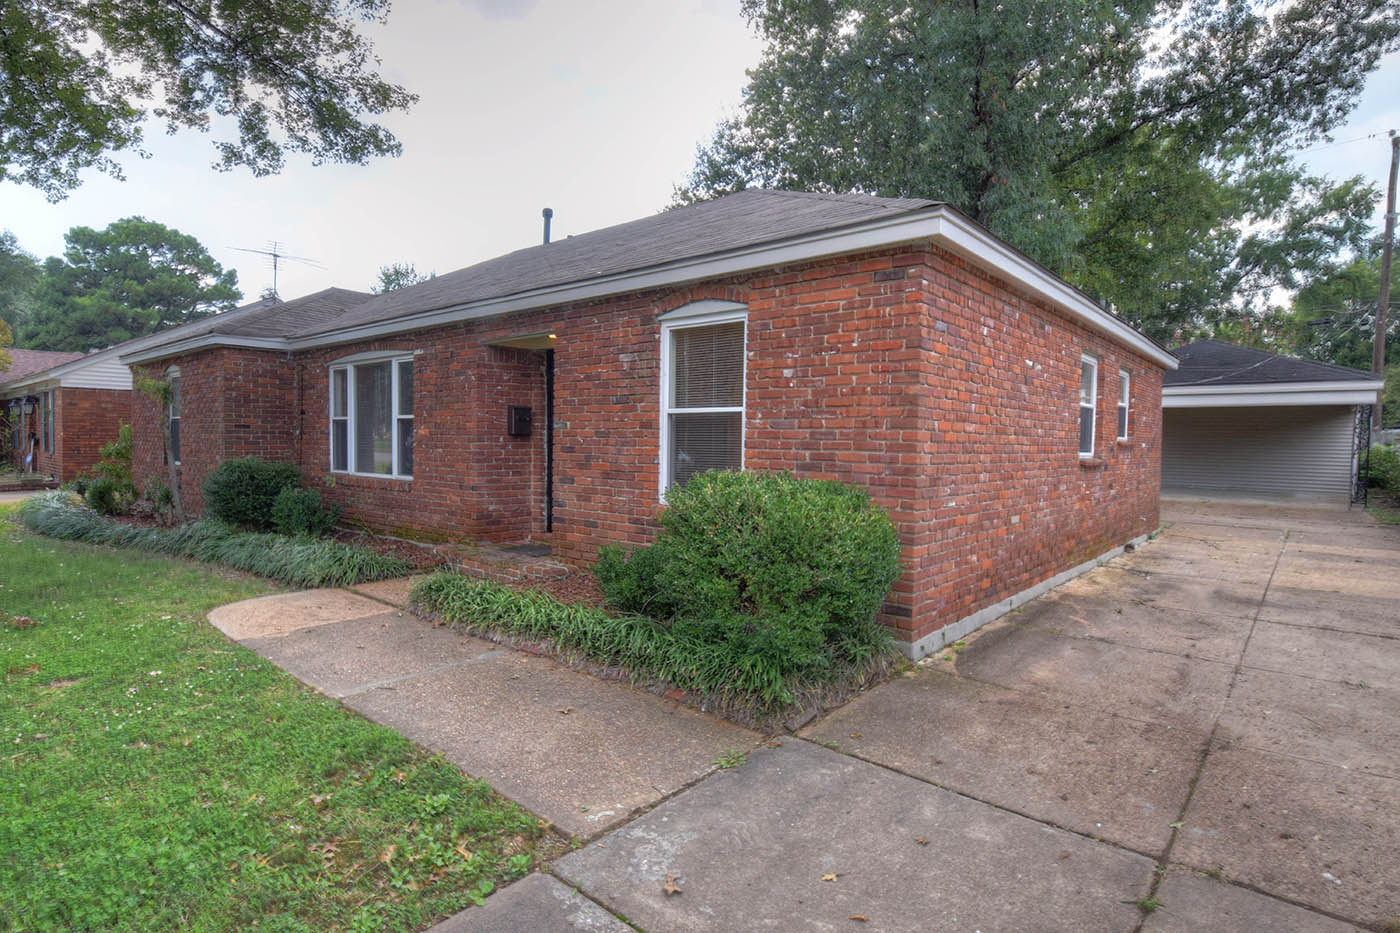 memphis turnkey properties for sale